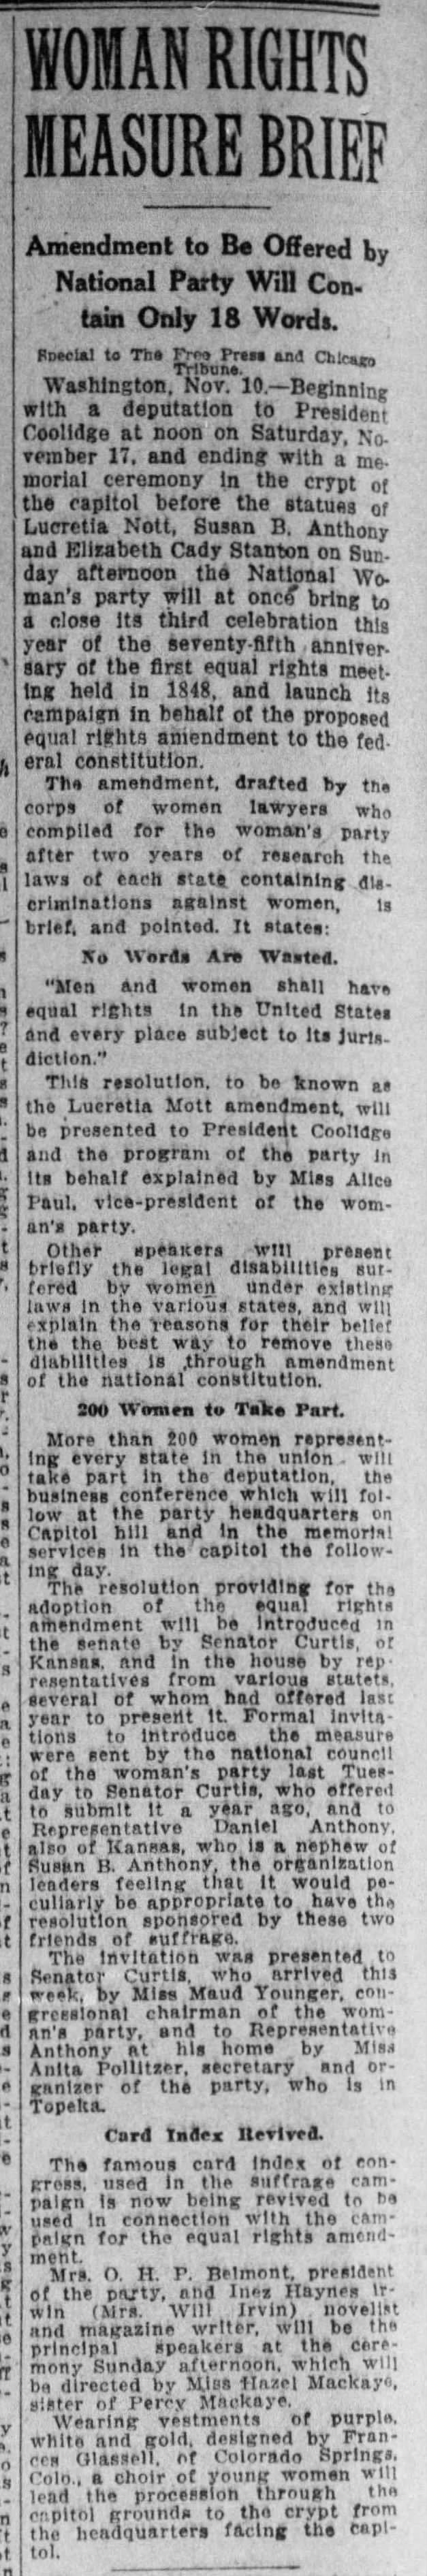 Activists launch "campaign in behalf of the proposed equal rights amendment" in November 1923